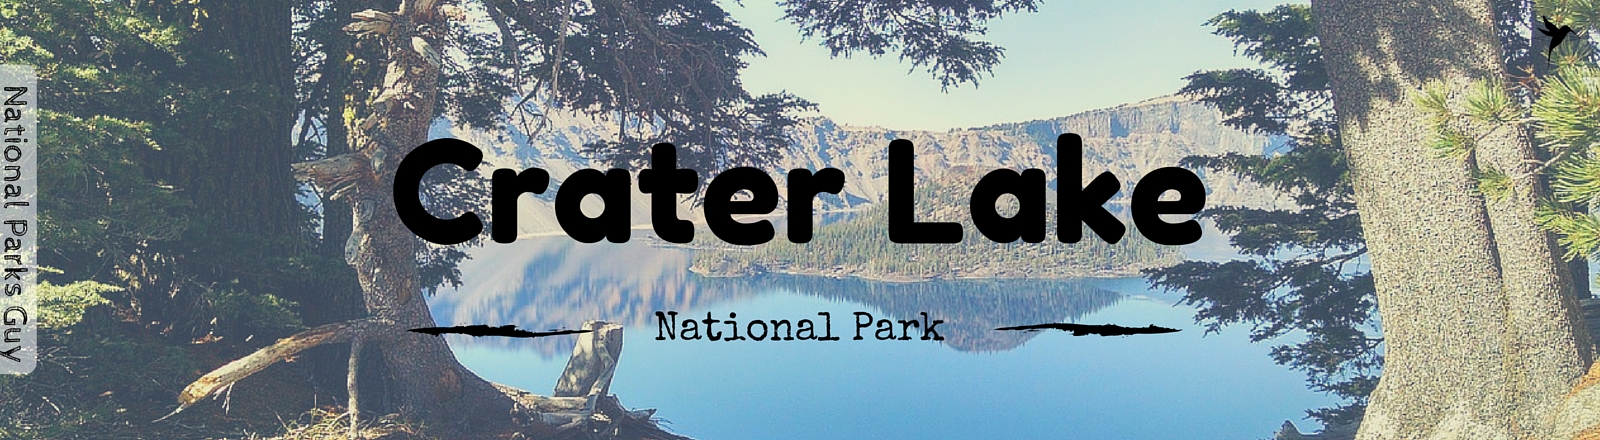 Crater Lake National Park, USA, National Parks Guy, Stories, Tales, Adventures, Wildlife